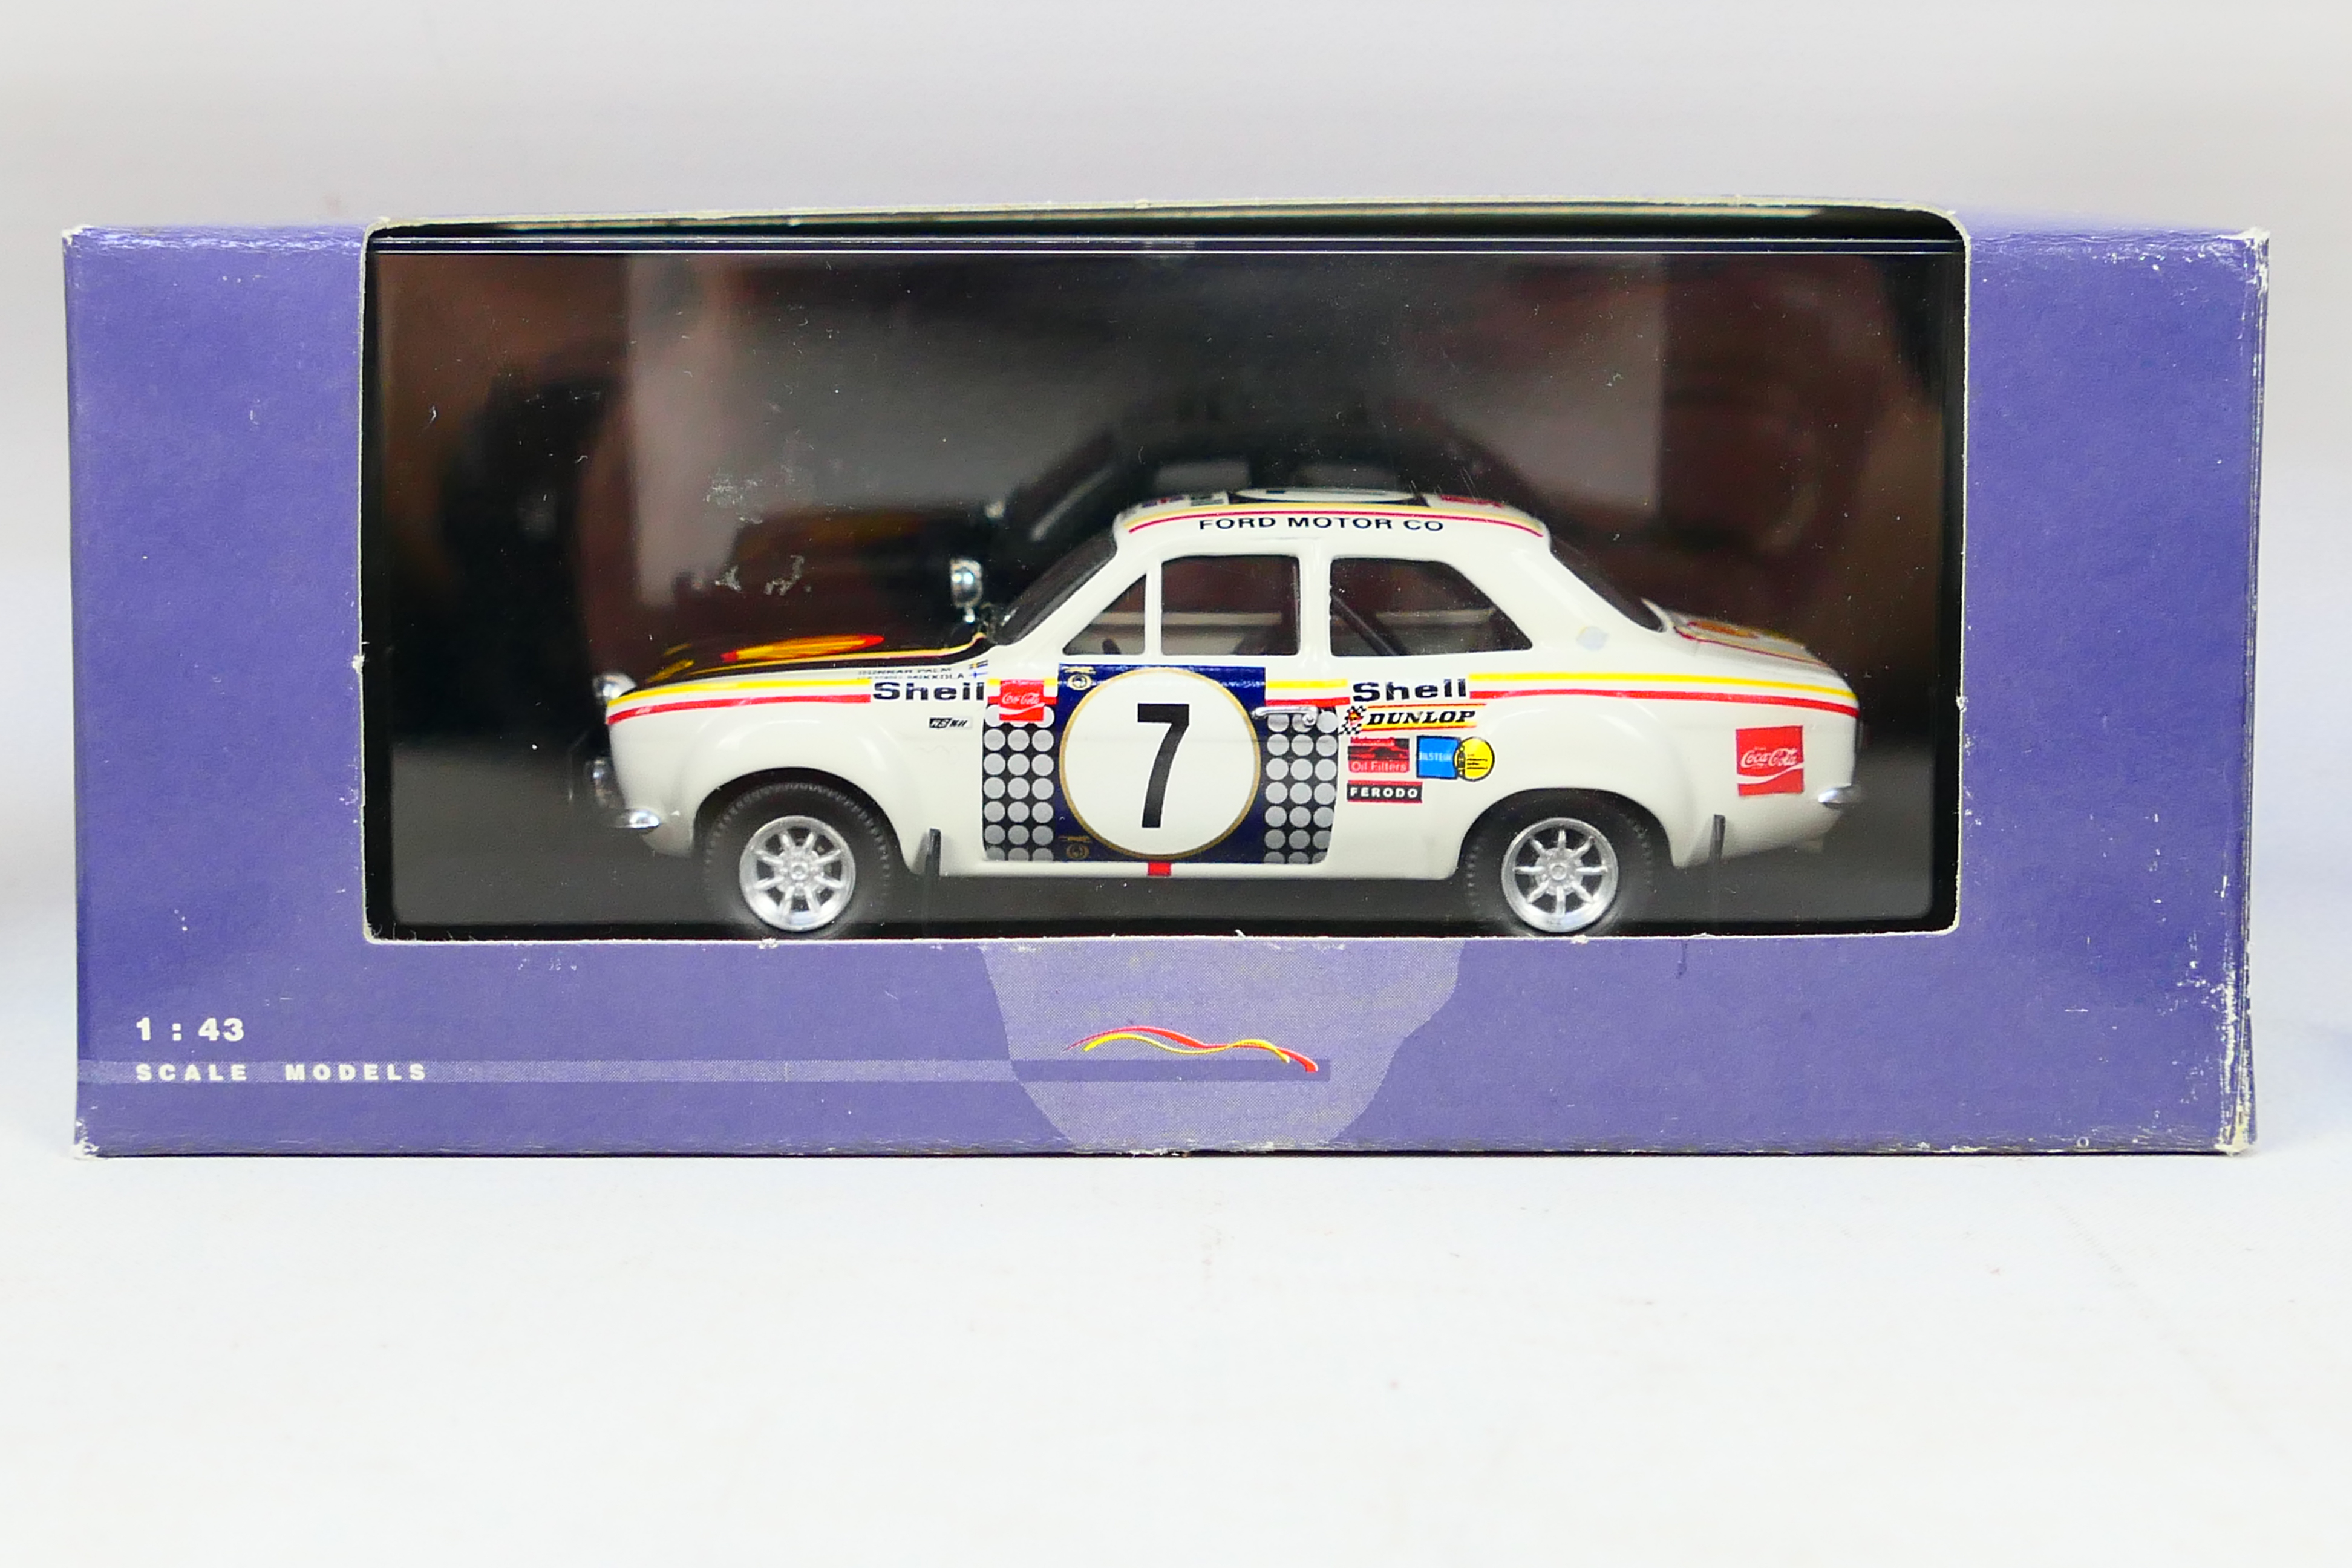 Trofeu - Three boxed 1:43 scale diecast model rally cars from Trofeu. - Image 3 of 4